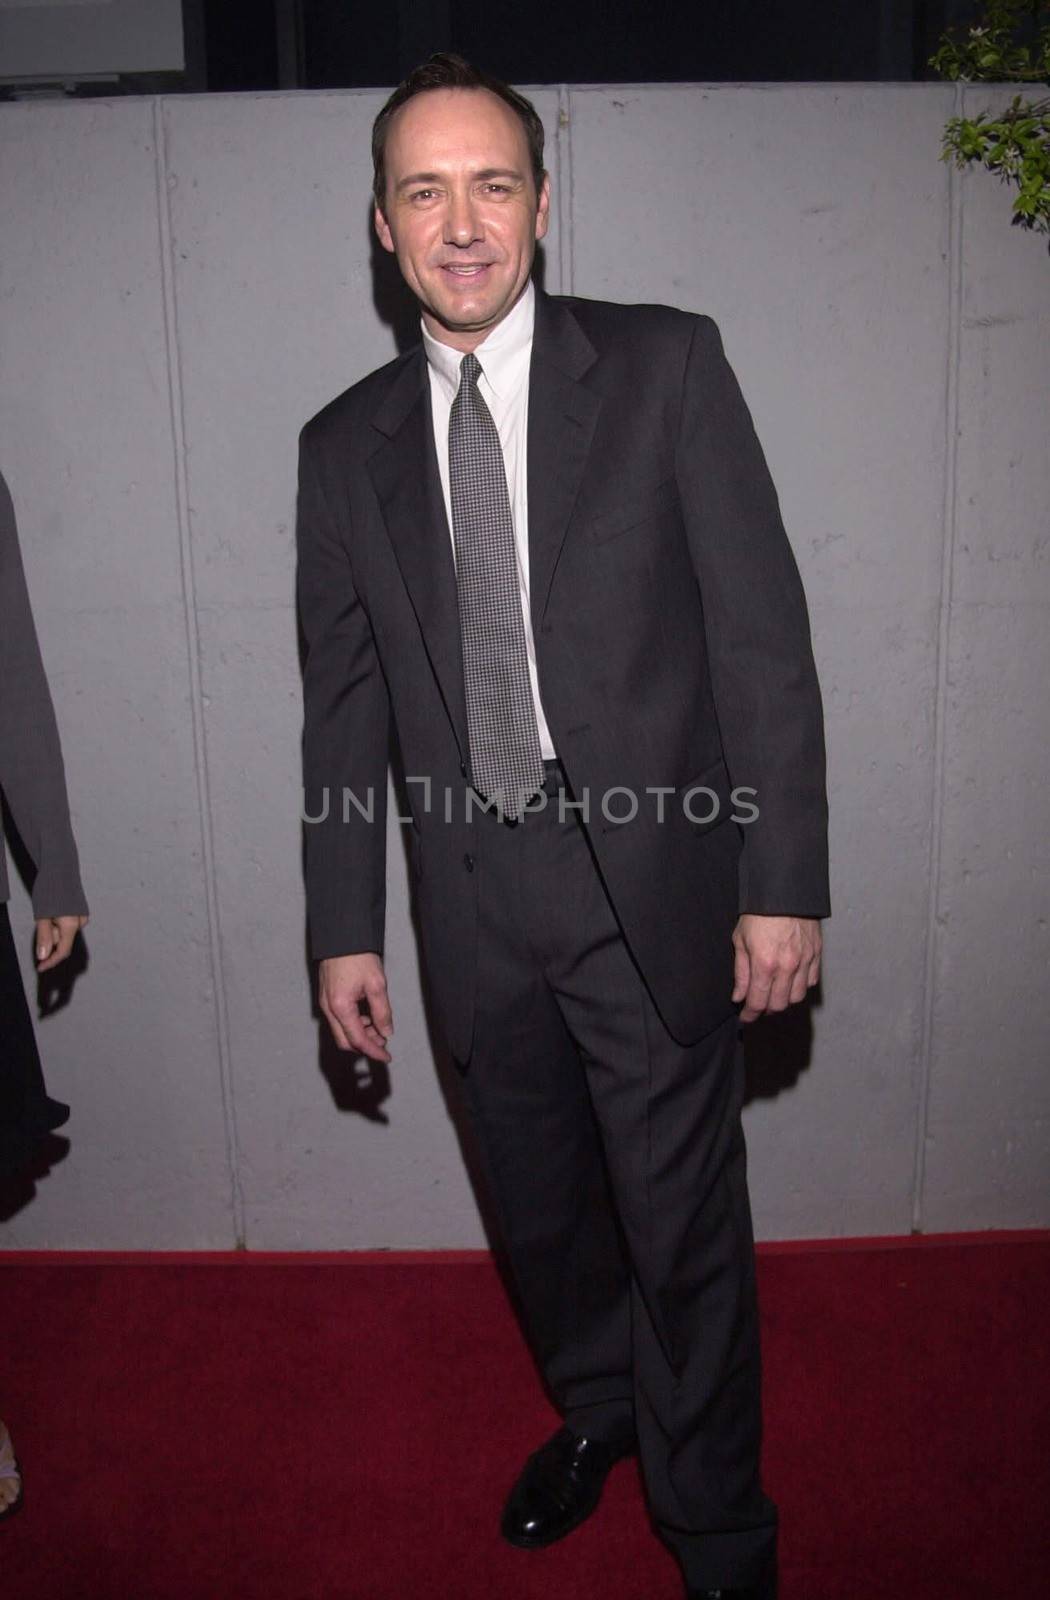 Kevin Spacey at the premiere of Lions Gate Film's "THE BIG KAHUNA" in Hollywood, 04-26-00